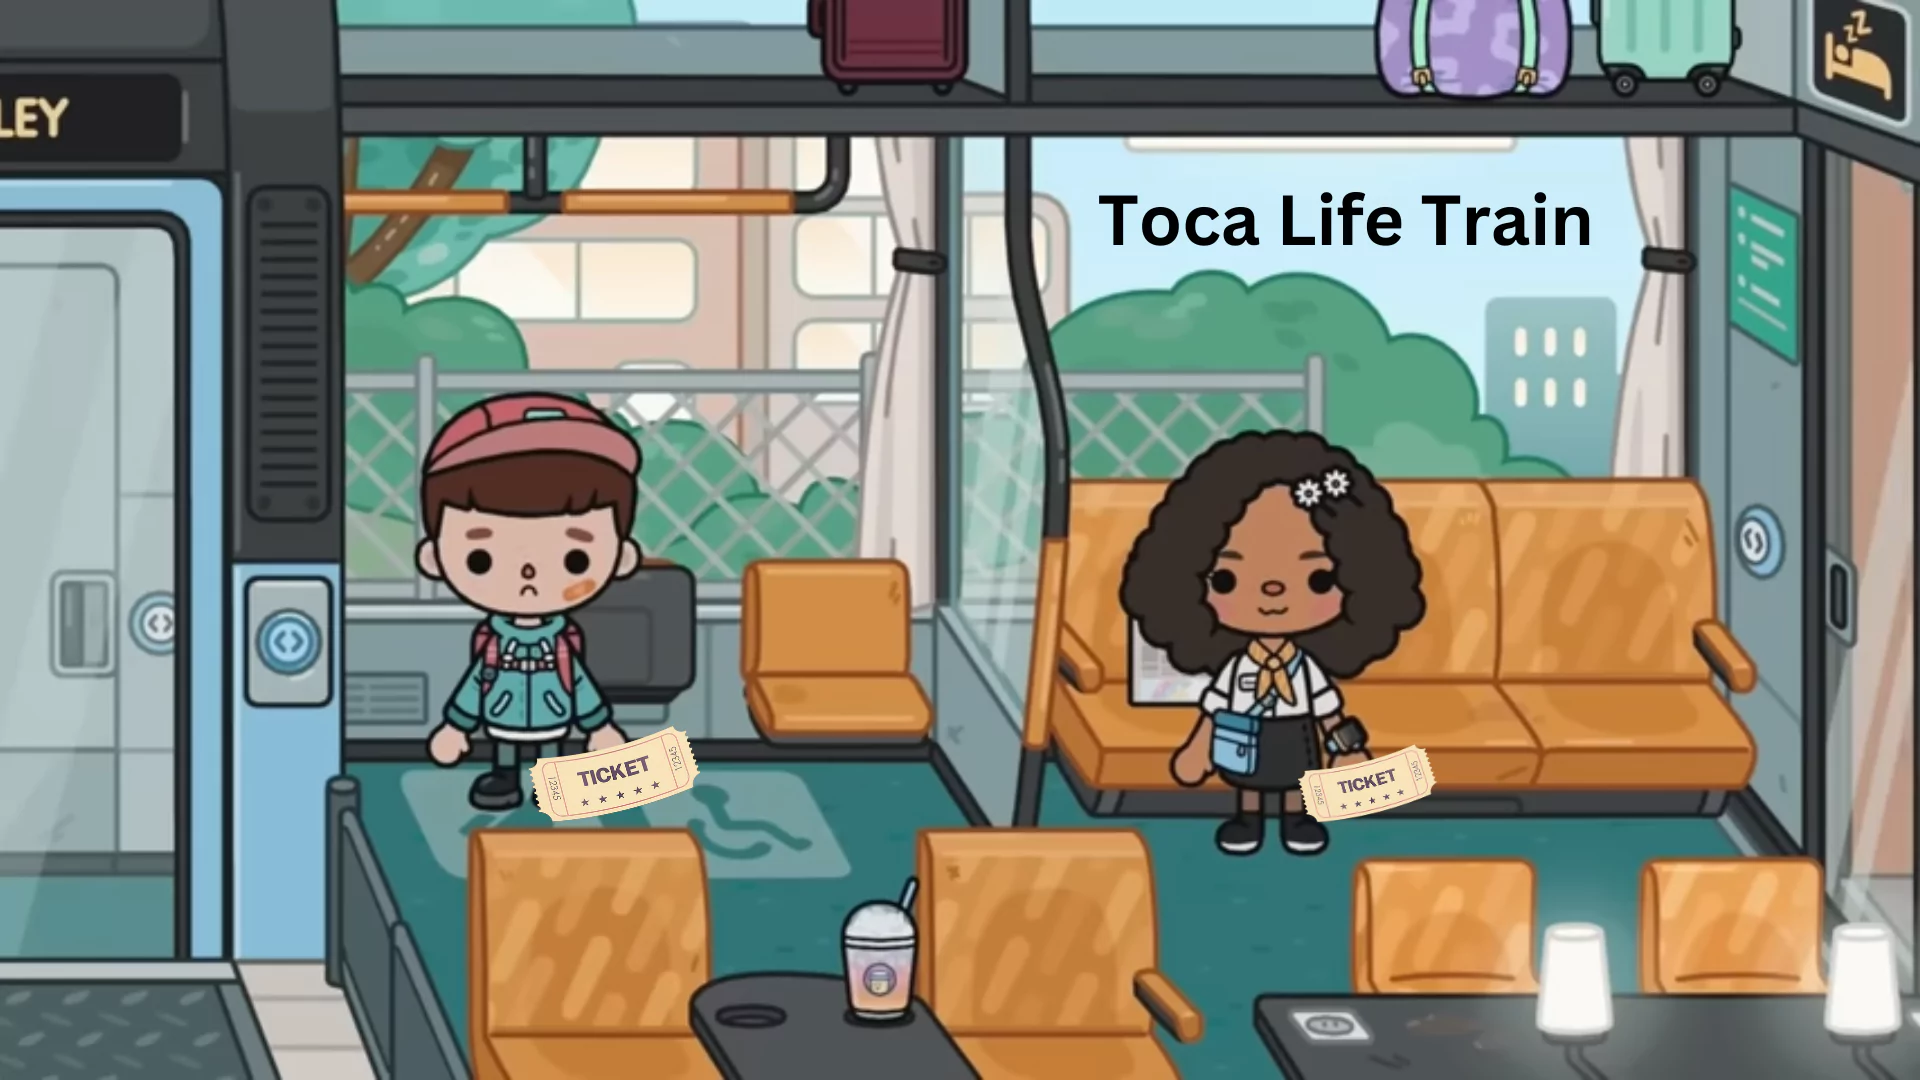 Embark on exciting railway journeys in Toca Life Train